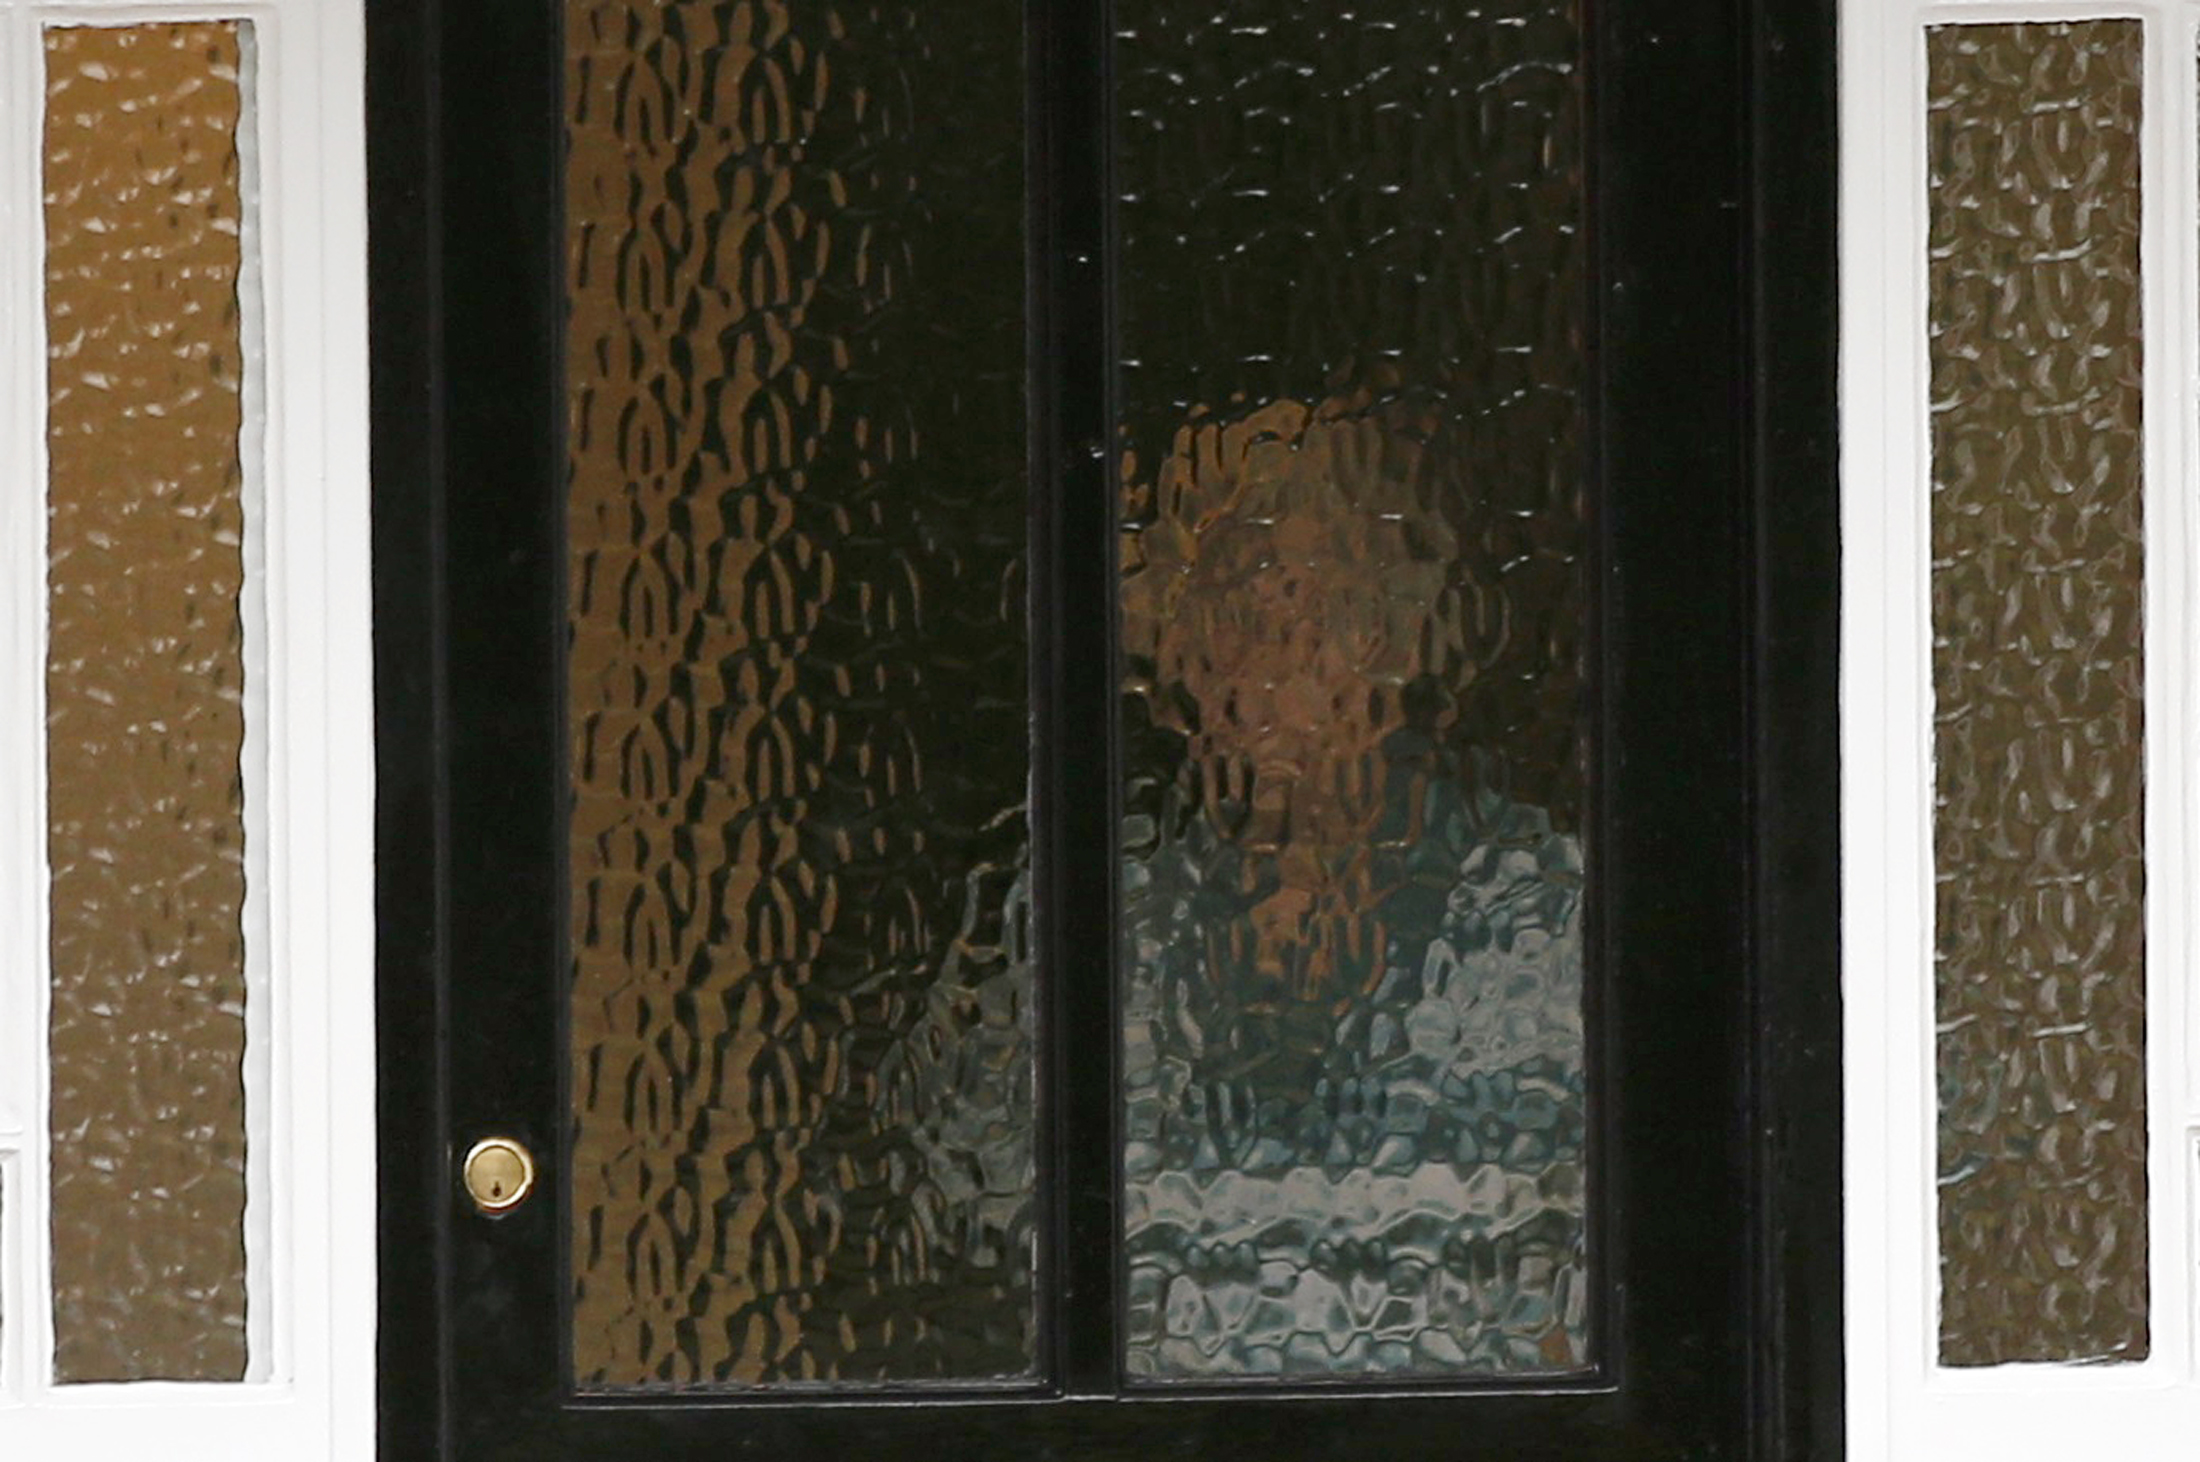 A person stands behind textured glass at an address which has been linked by local media to former British intelligence officer Christopher Steele, who has been named as the author of an intelligence dossier on President-elect Donald Trump, in Wokingham